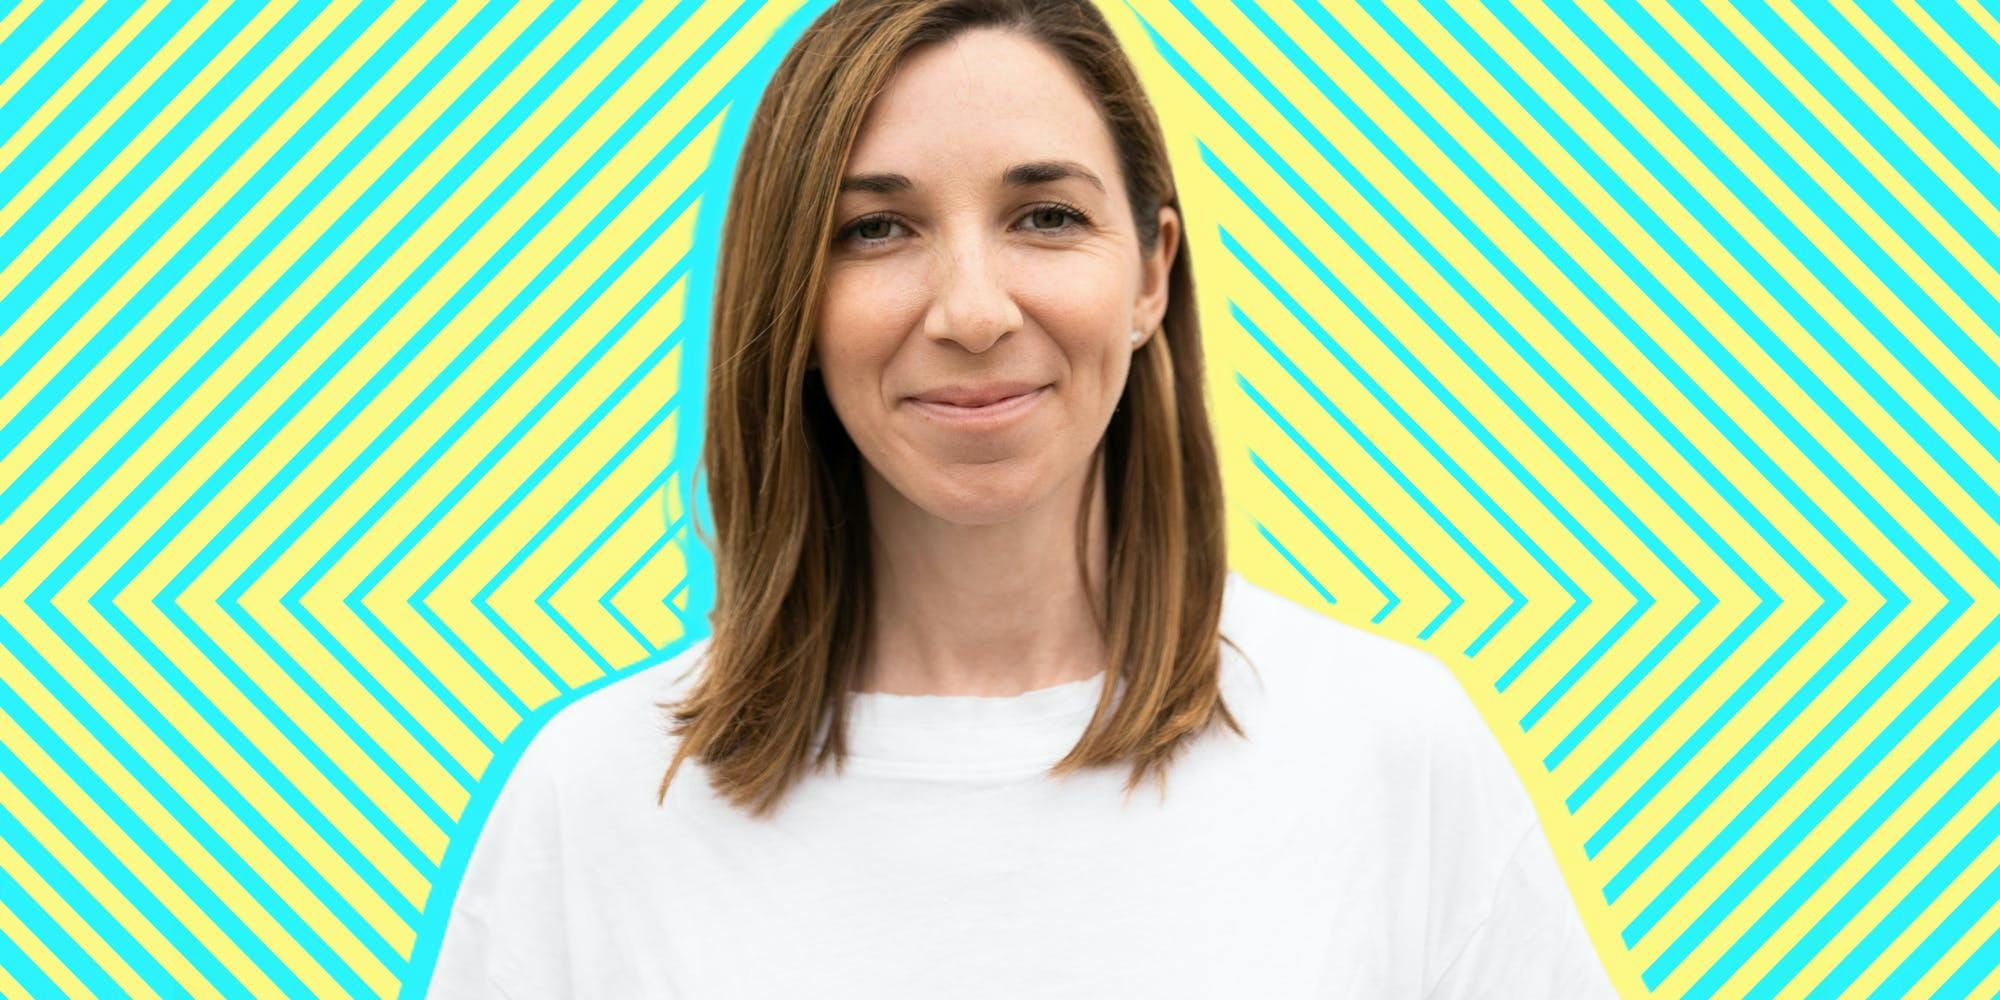 ‘Niche Is Really Where It’s At’: Patreon’s New Creator Whisperer Sarah Penna Shares Her Advice for Up-and-Comers